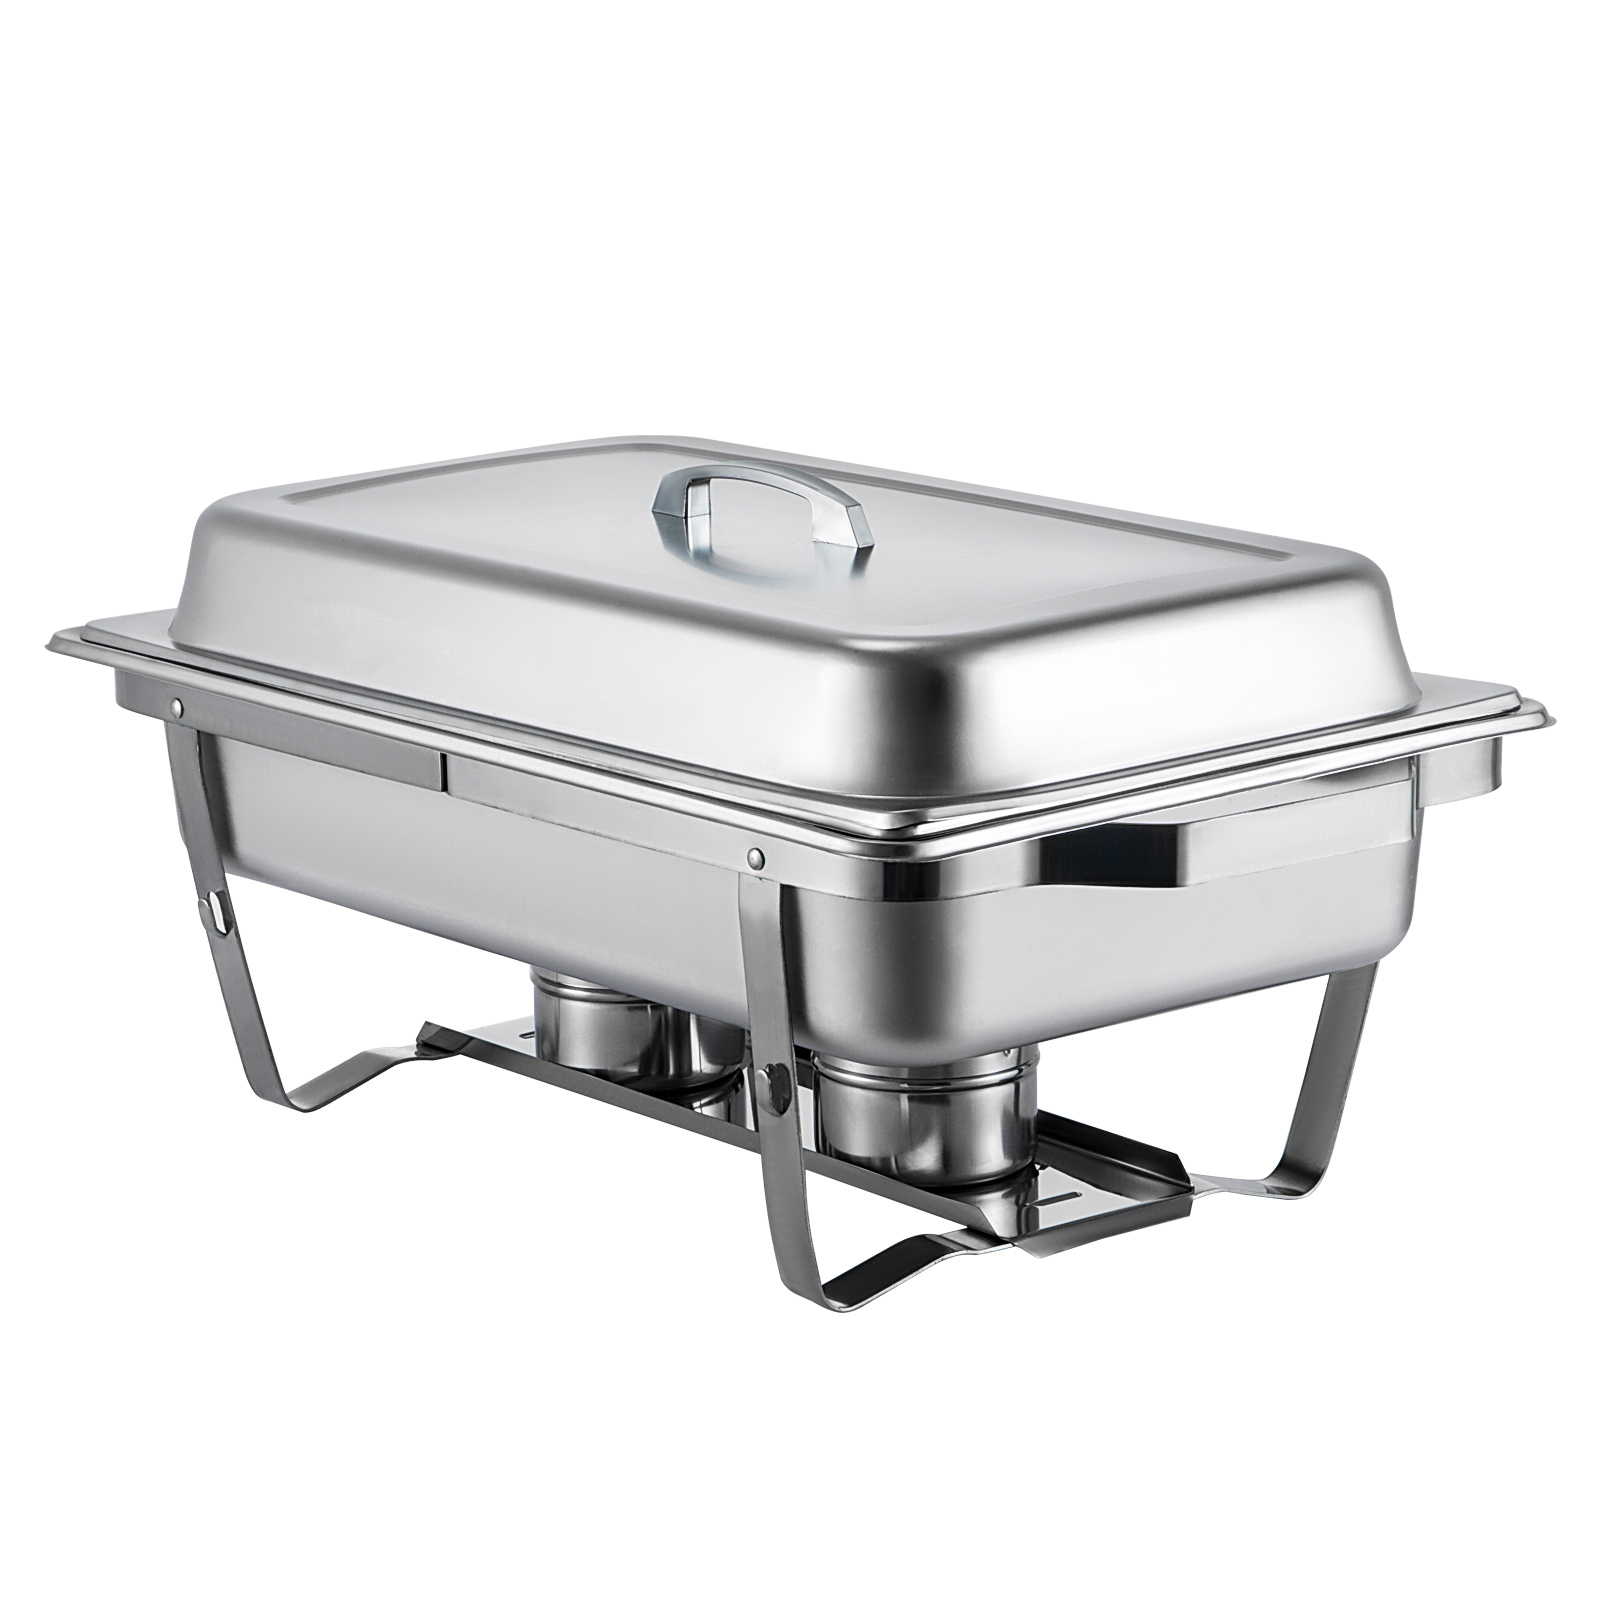 4 PACK CHAFING DISH SETS BUFFET CATERING RECTANGULAR